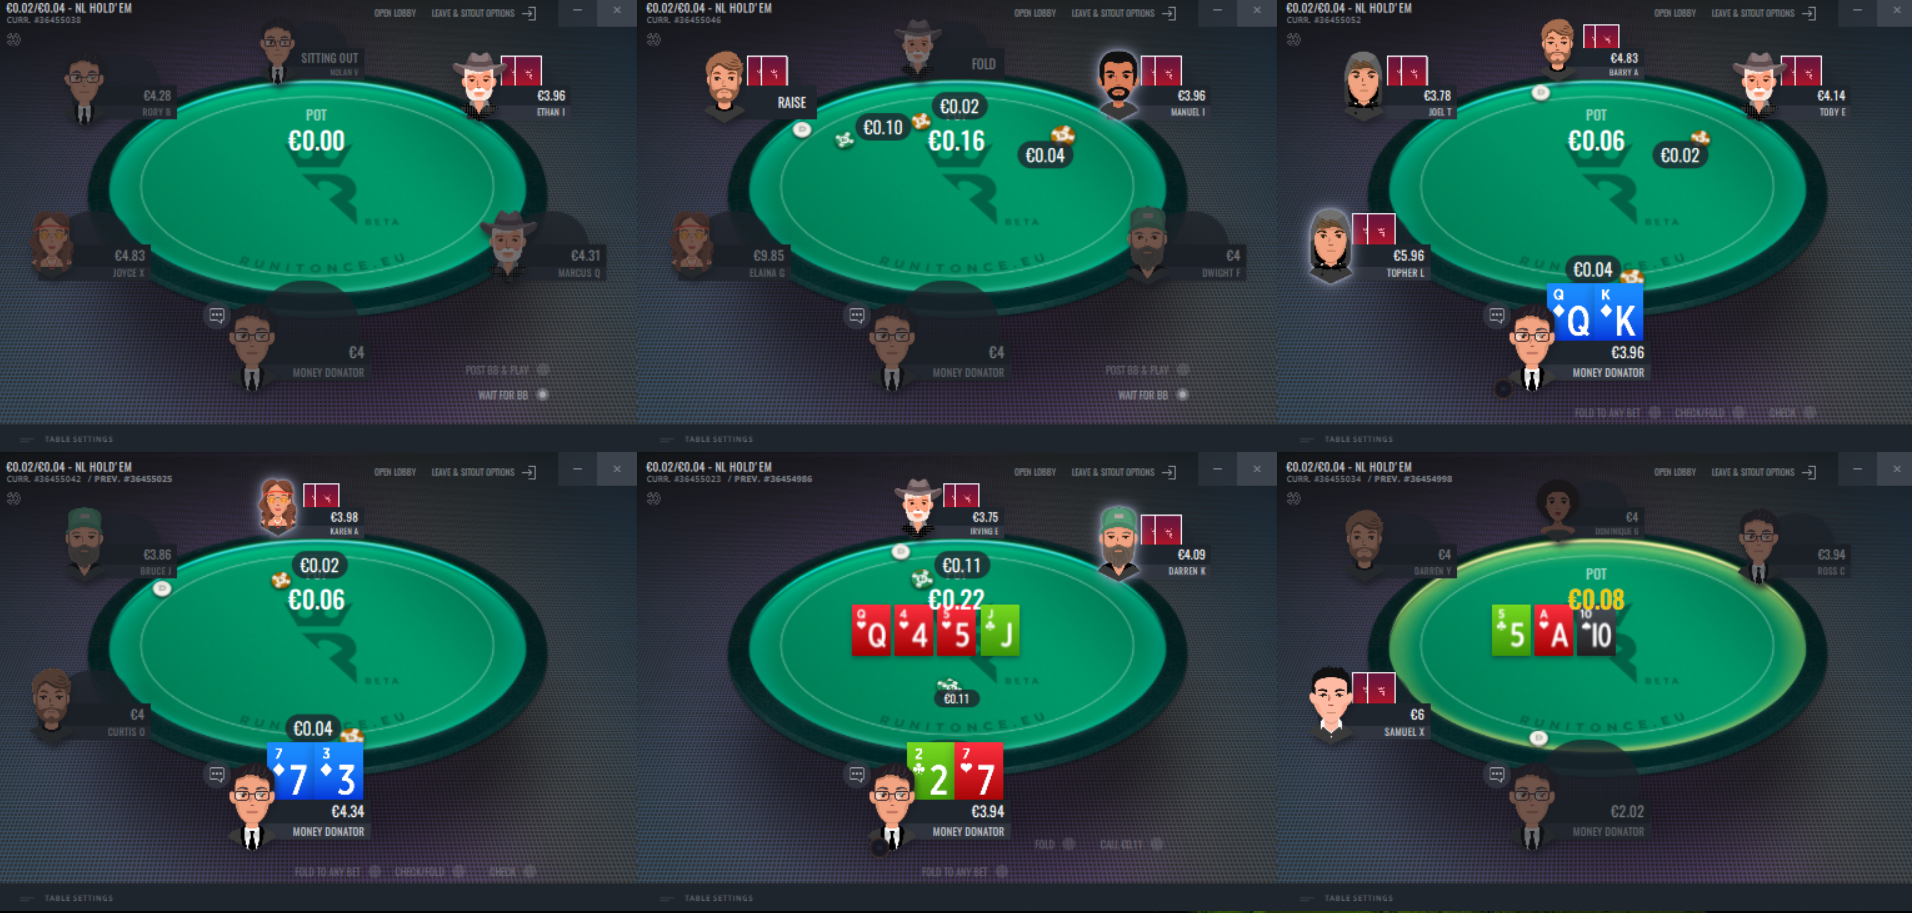 Multi-tabling is quite smooth at Run It Once Poker